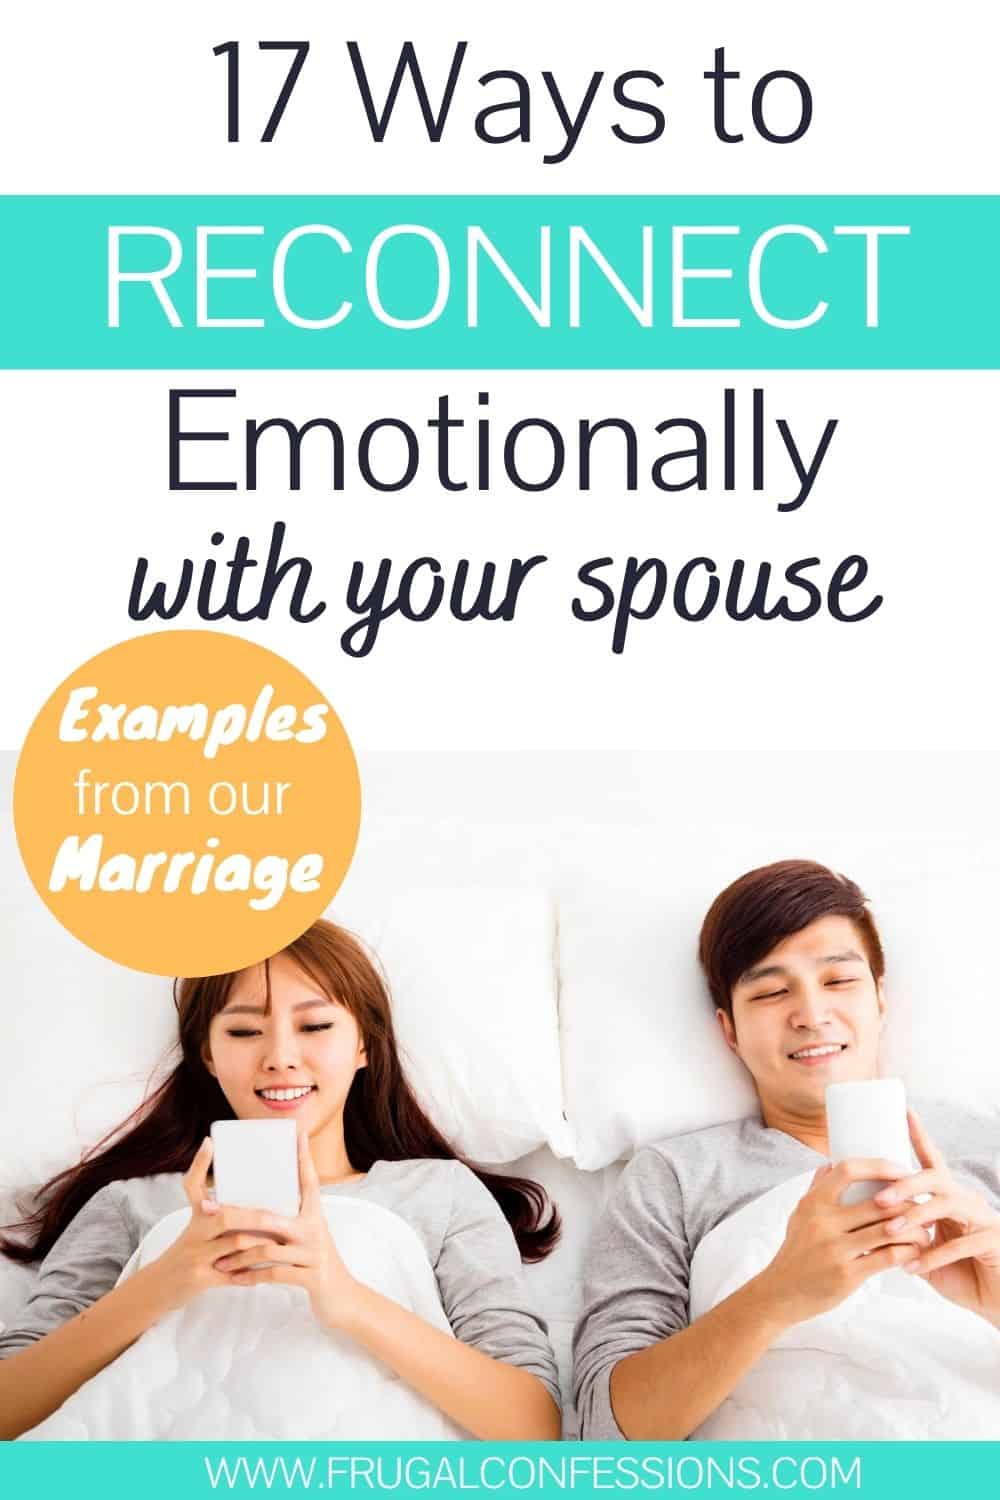 married couple in bed together with smartphones, text overlay 